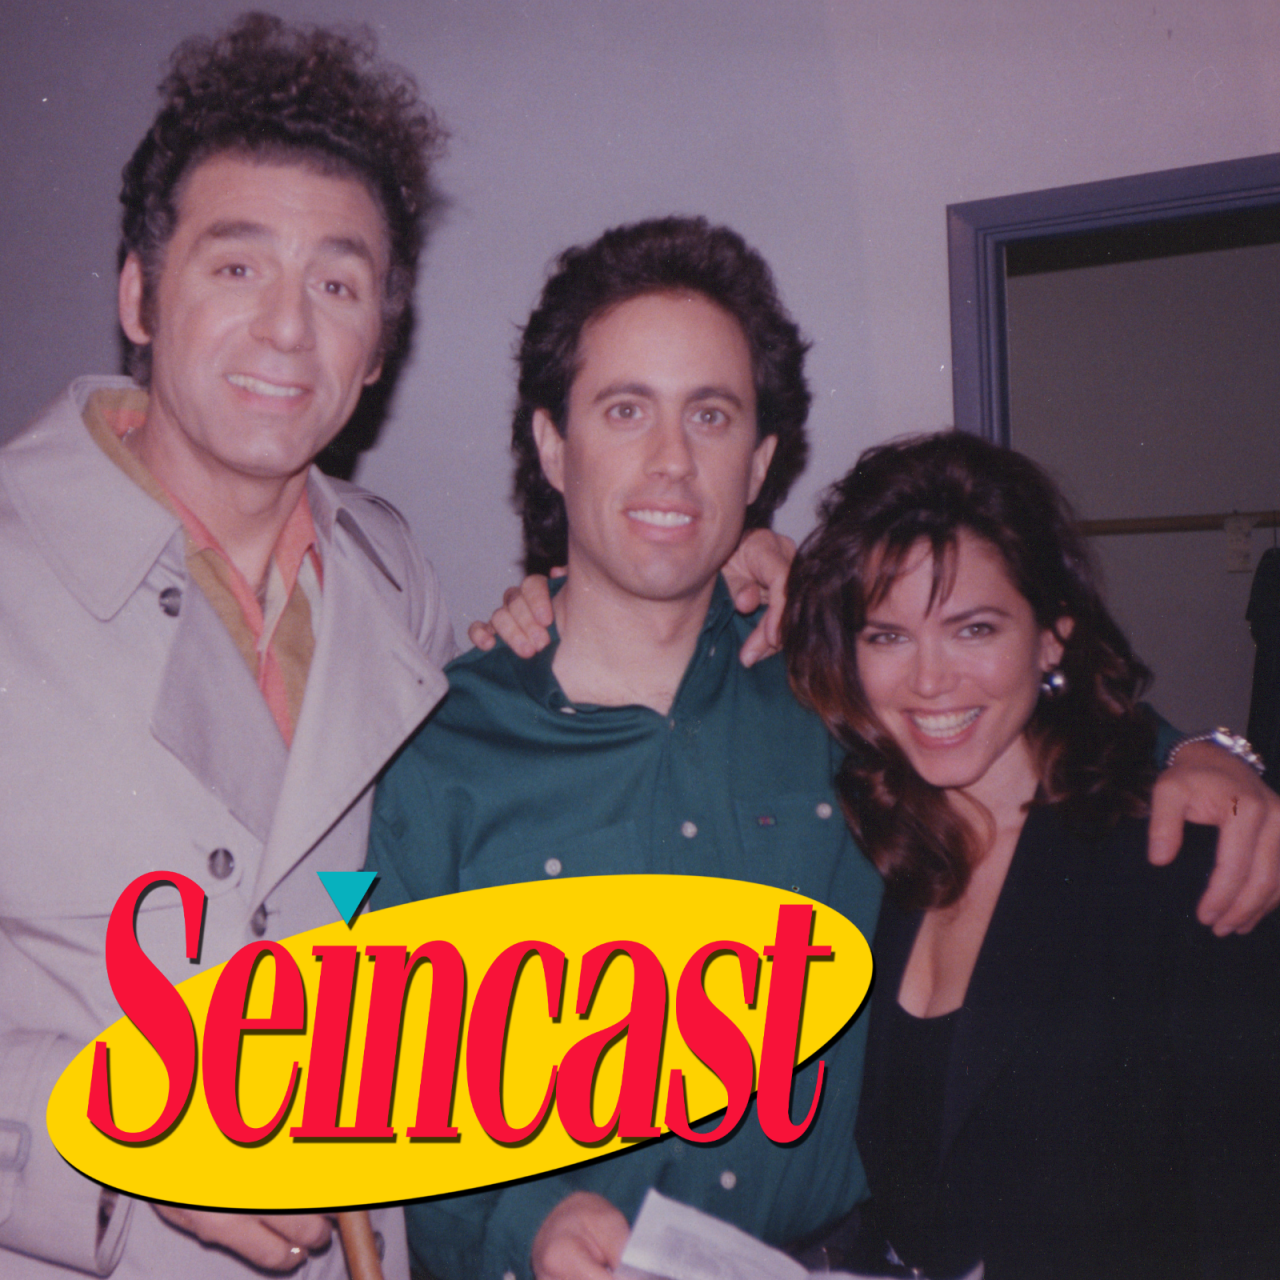 SEINCAST: A Seinfeld Podcast — She was looking for the baby’s room, but found us...